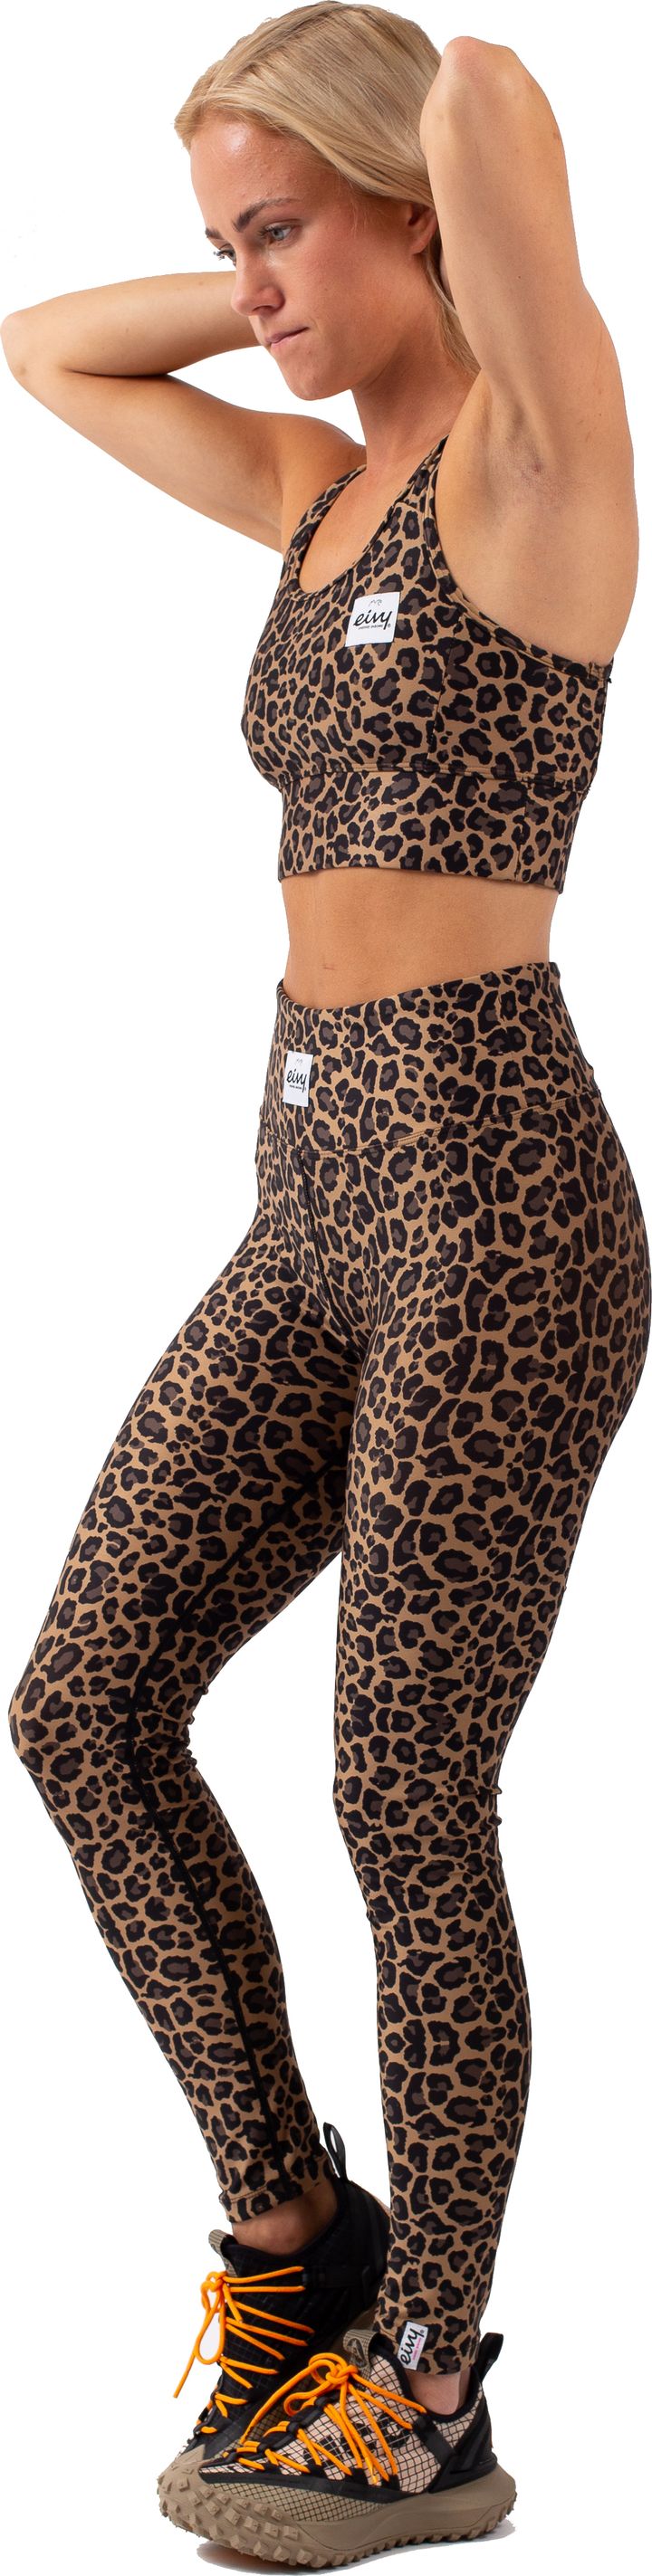 Women's Icecold Tights Leopard  Buy Women's Icecold Tights